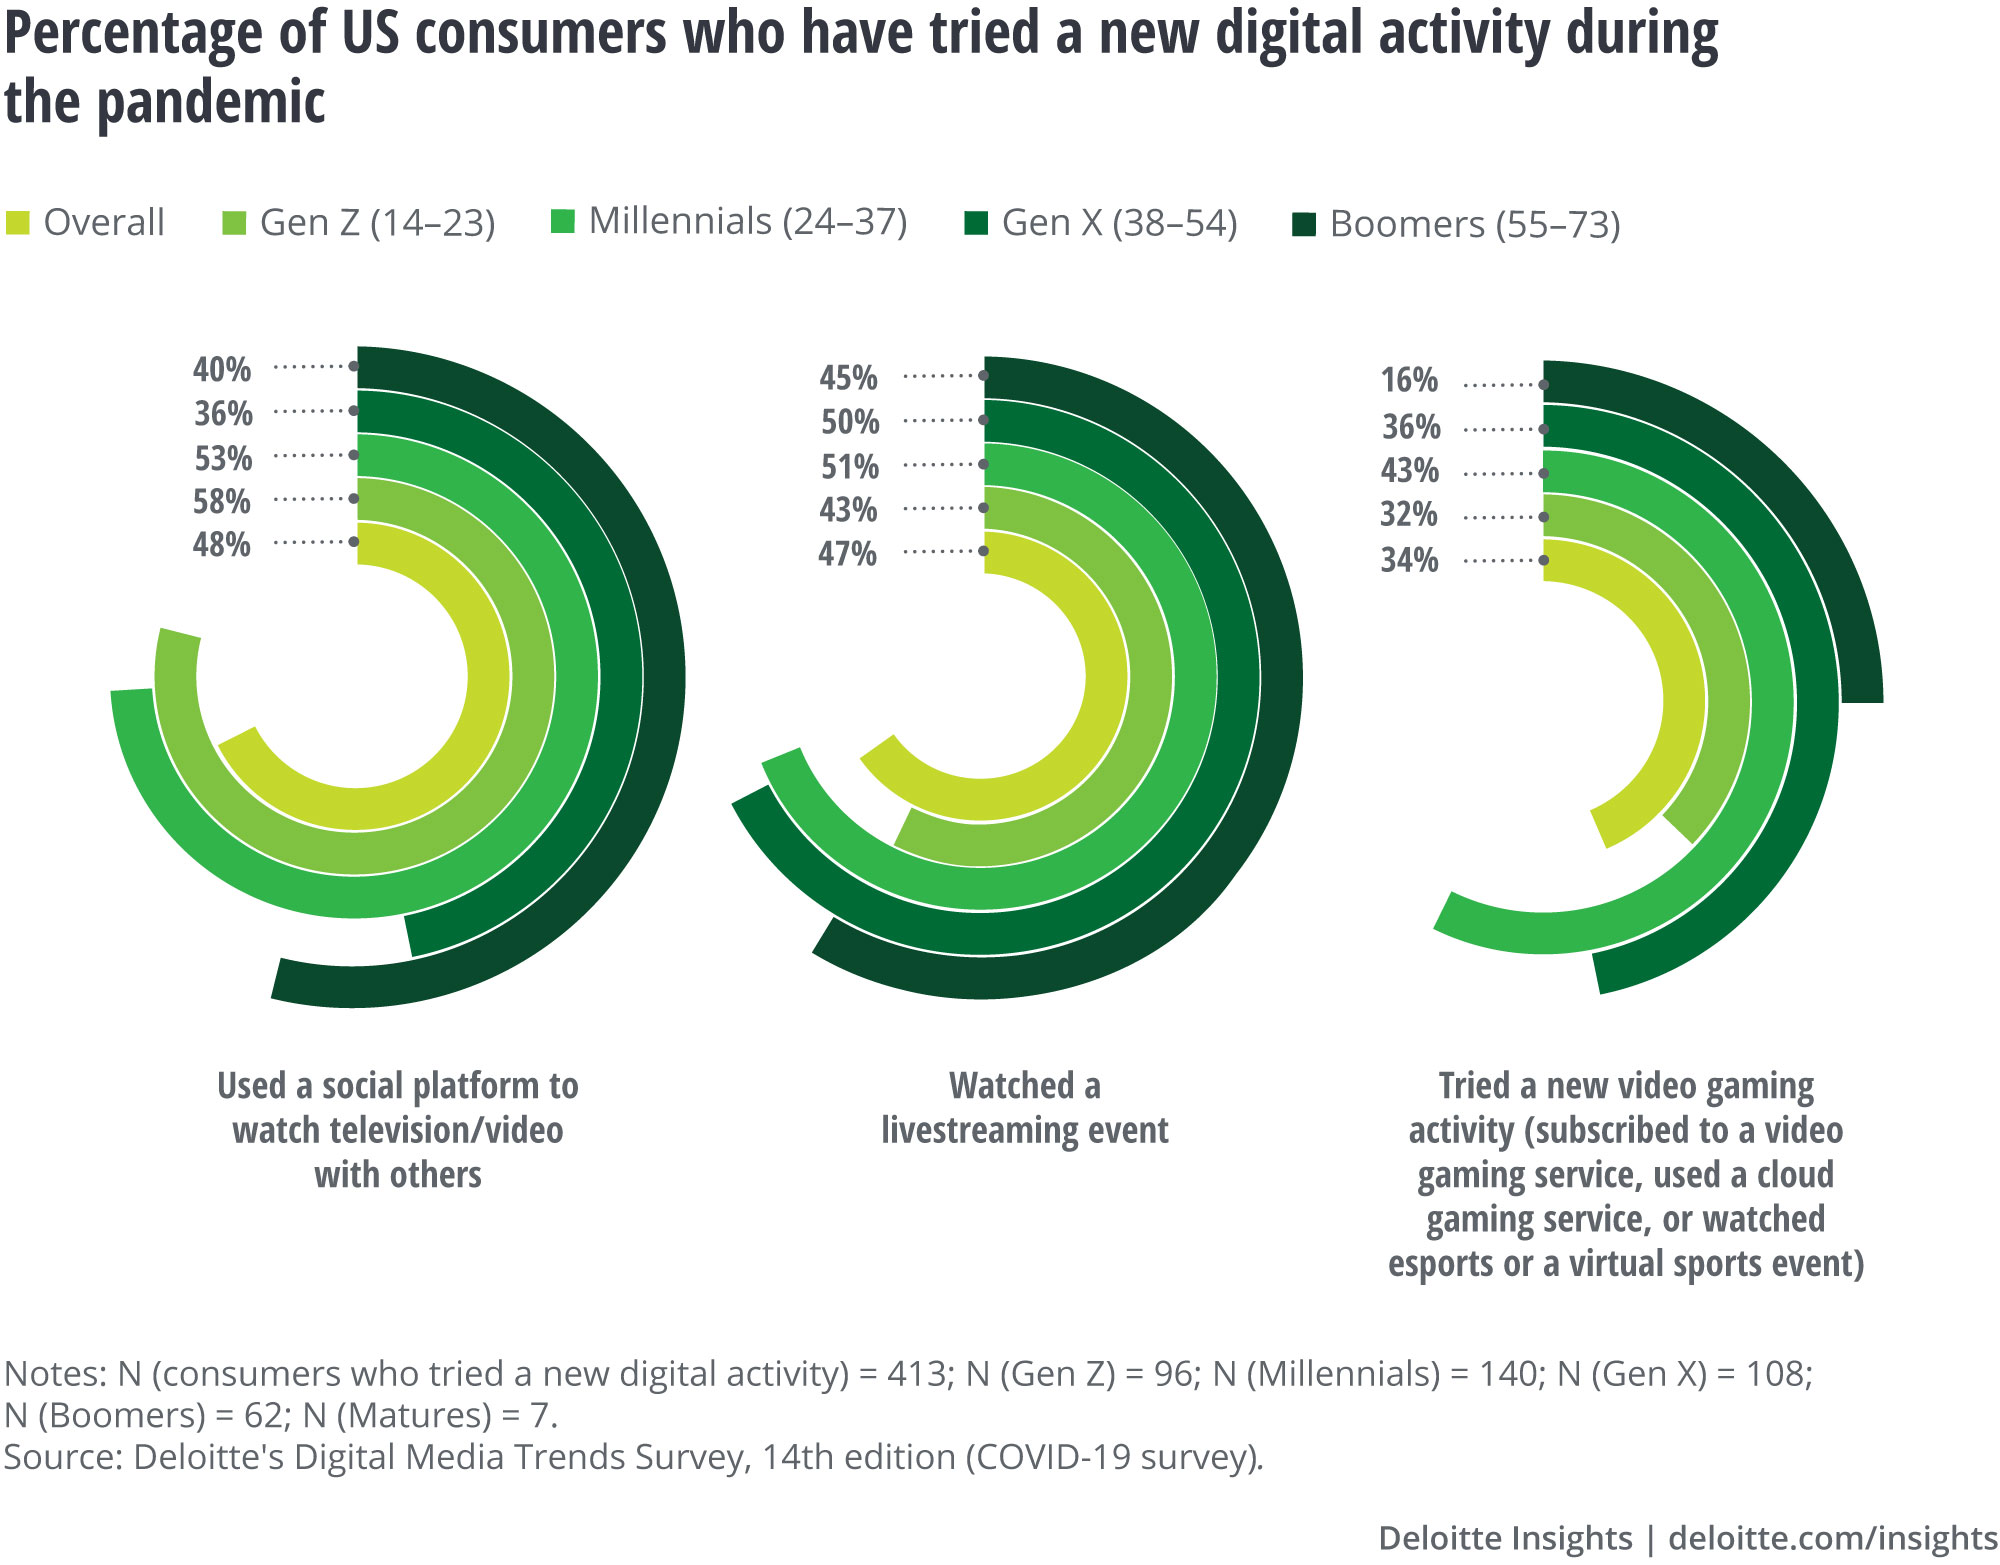 Percentage of US consumers who have tried a new digital activity during the pandemic